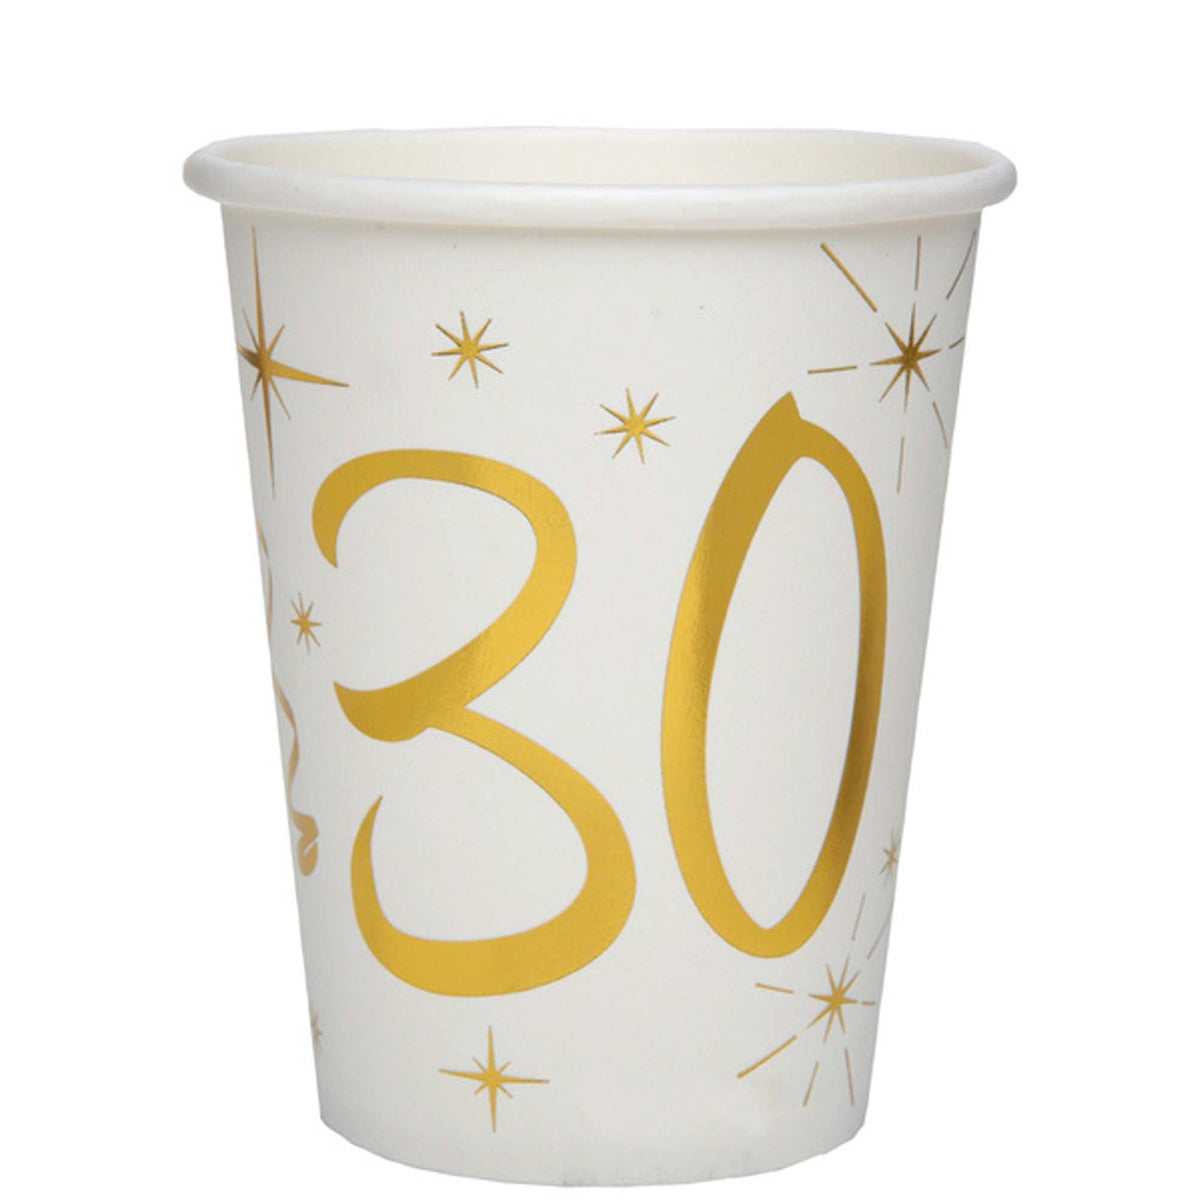 SANTEX General Birthday Starry Golden Age 30th Birthday Party Paper Cups, 9 Oz, 10 Count 3660380040477